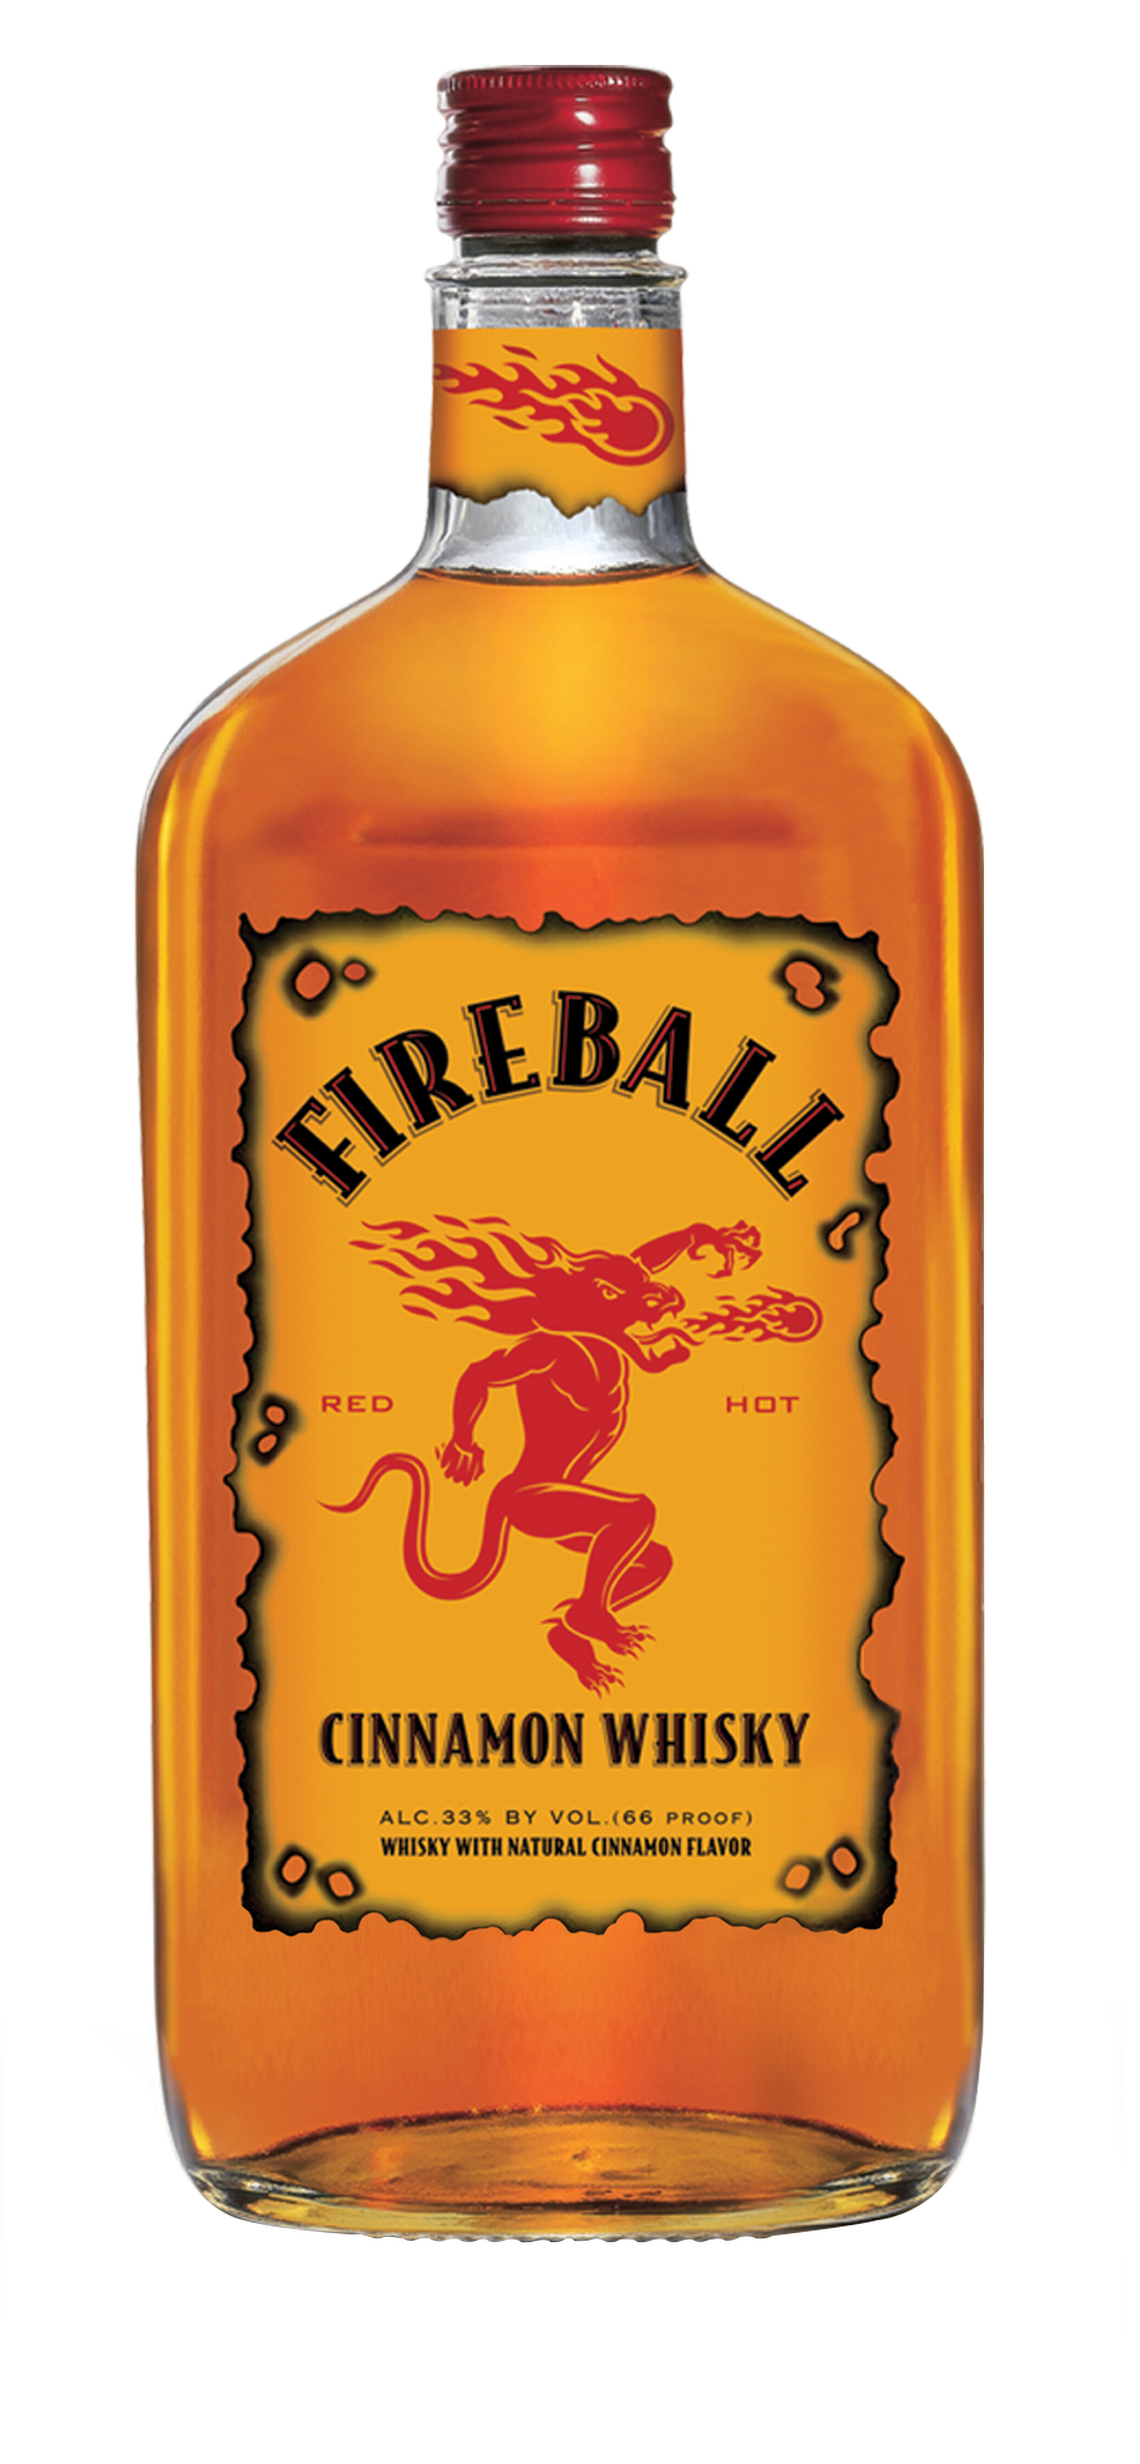 Fireball Cinnamon Whisky is Sazerac’s biggest selling product by volume and revenue, according to its lawsuit against RNDC.